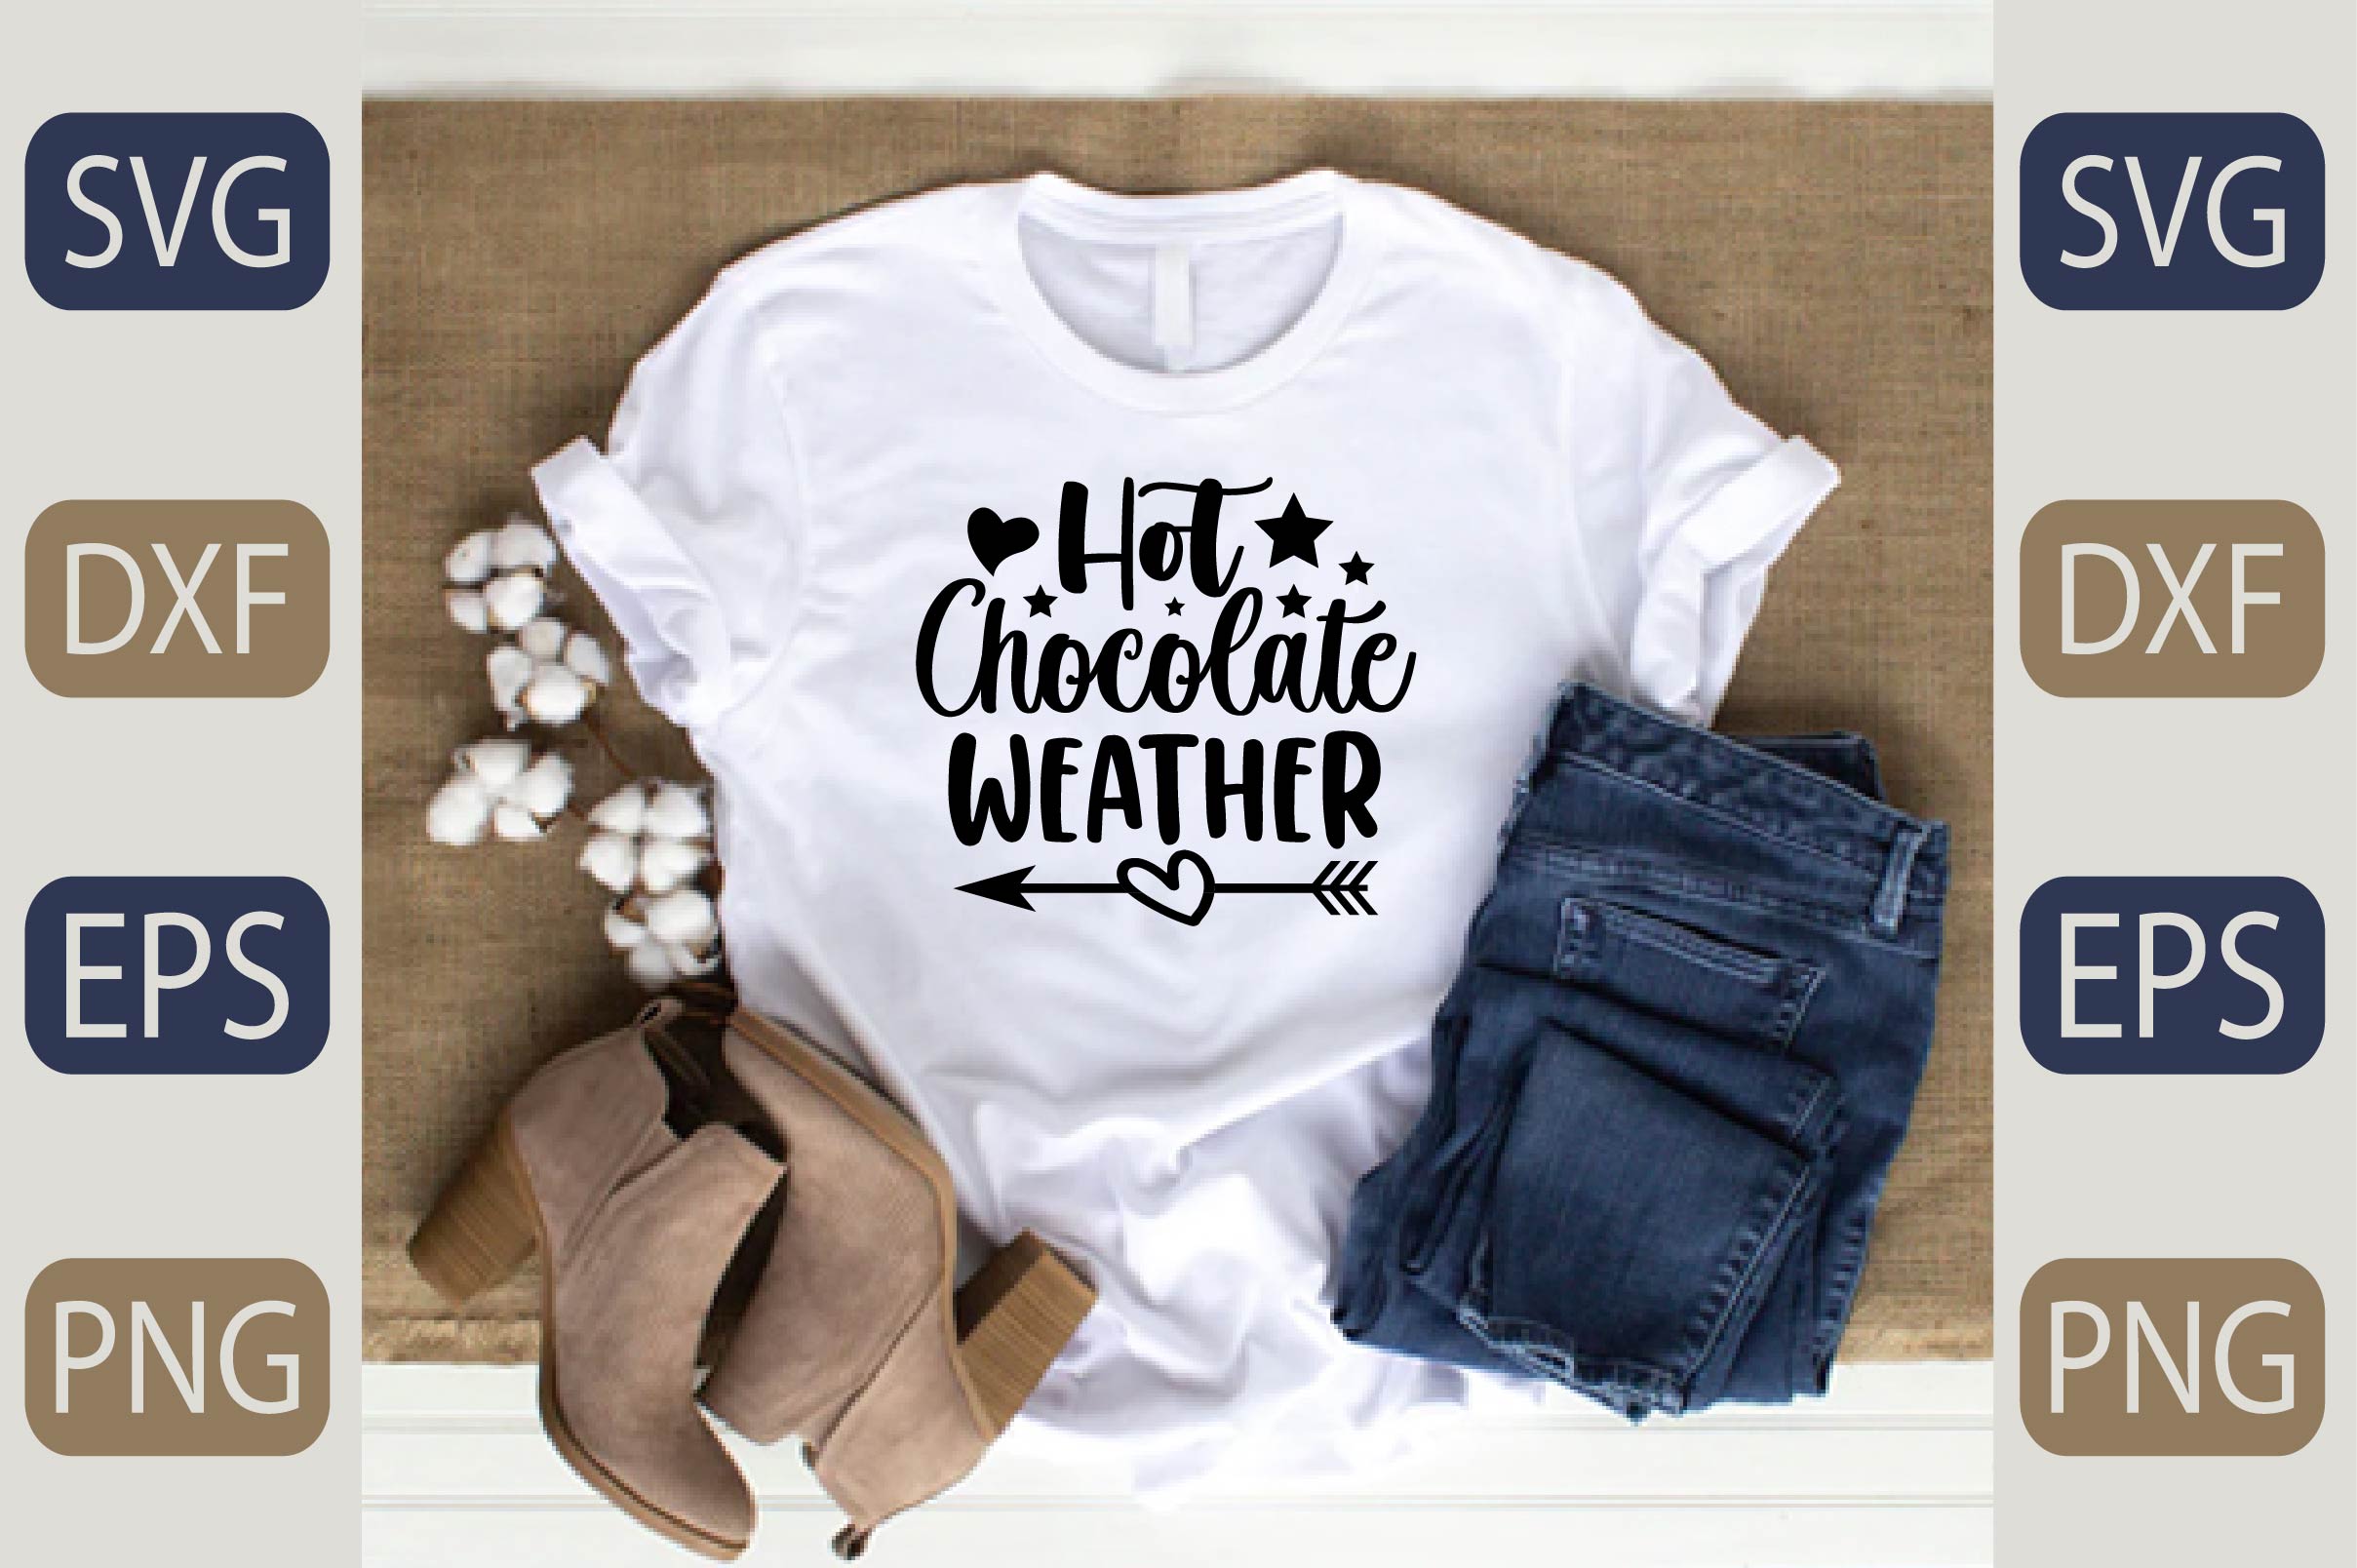 T - shirt that says hot chocolate weather.